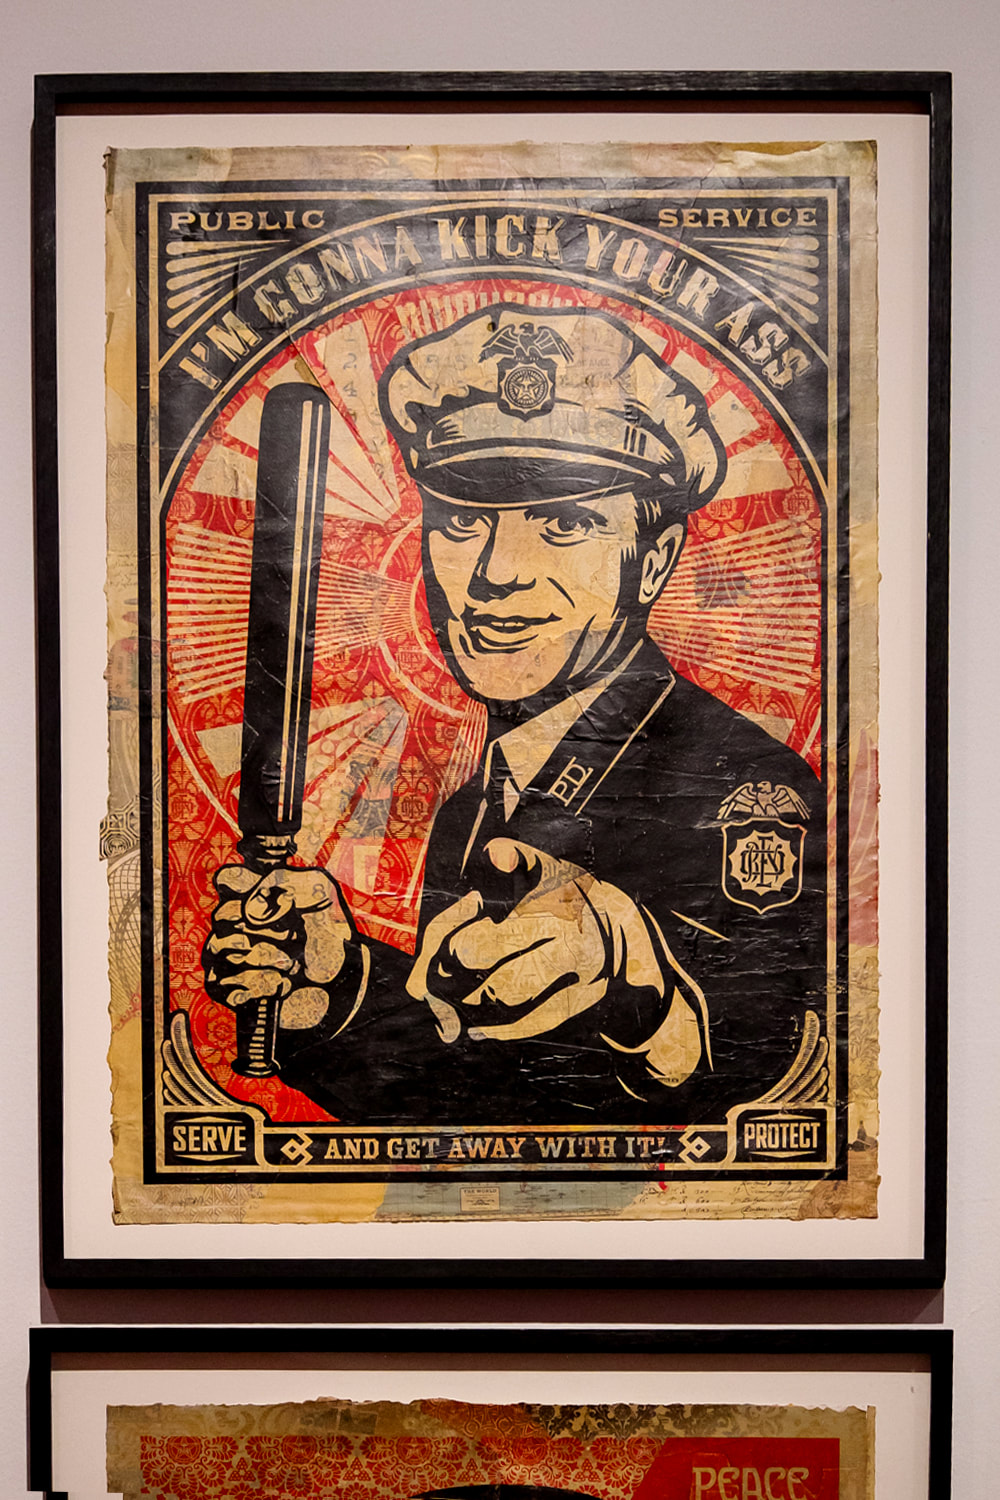 Singapore: Art From The Streets Exhibition at the ArtScience Museum - I'm Gonna Kick Your Ass - Shepard Fairey - 2006.